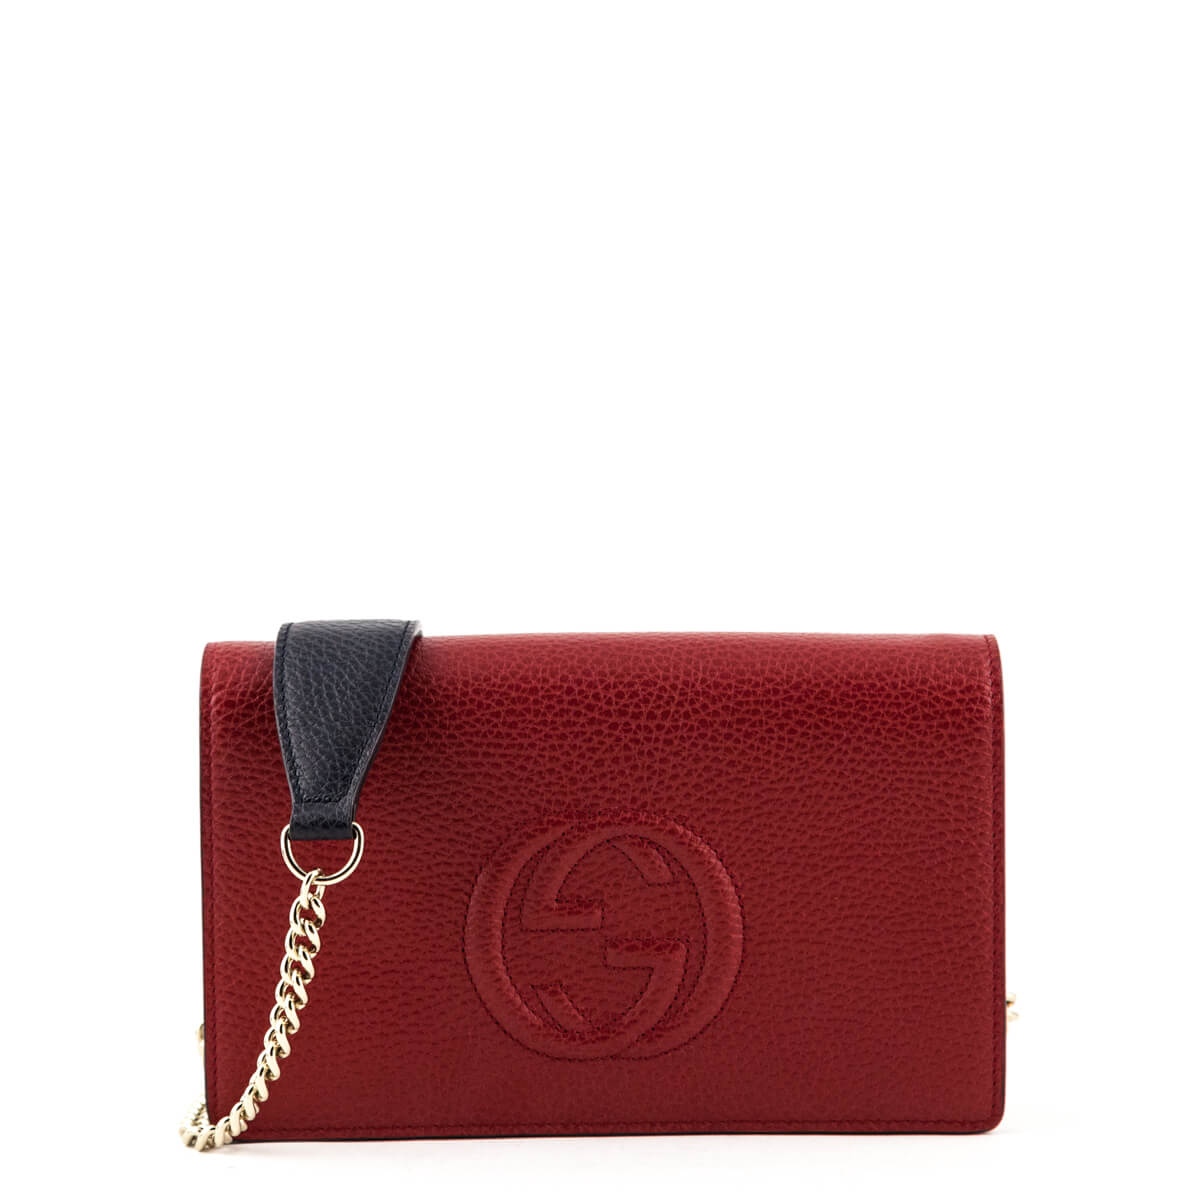 gucci wallet on chain sale